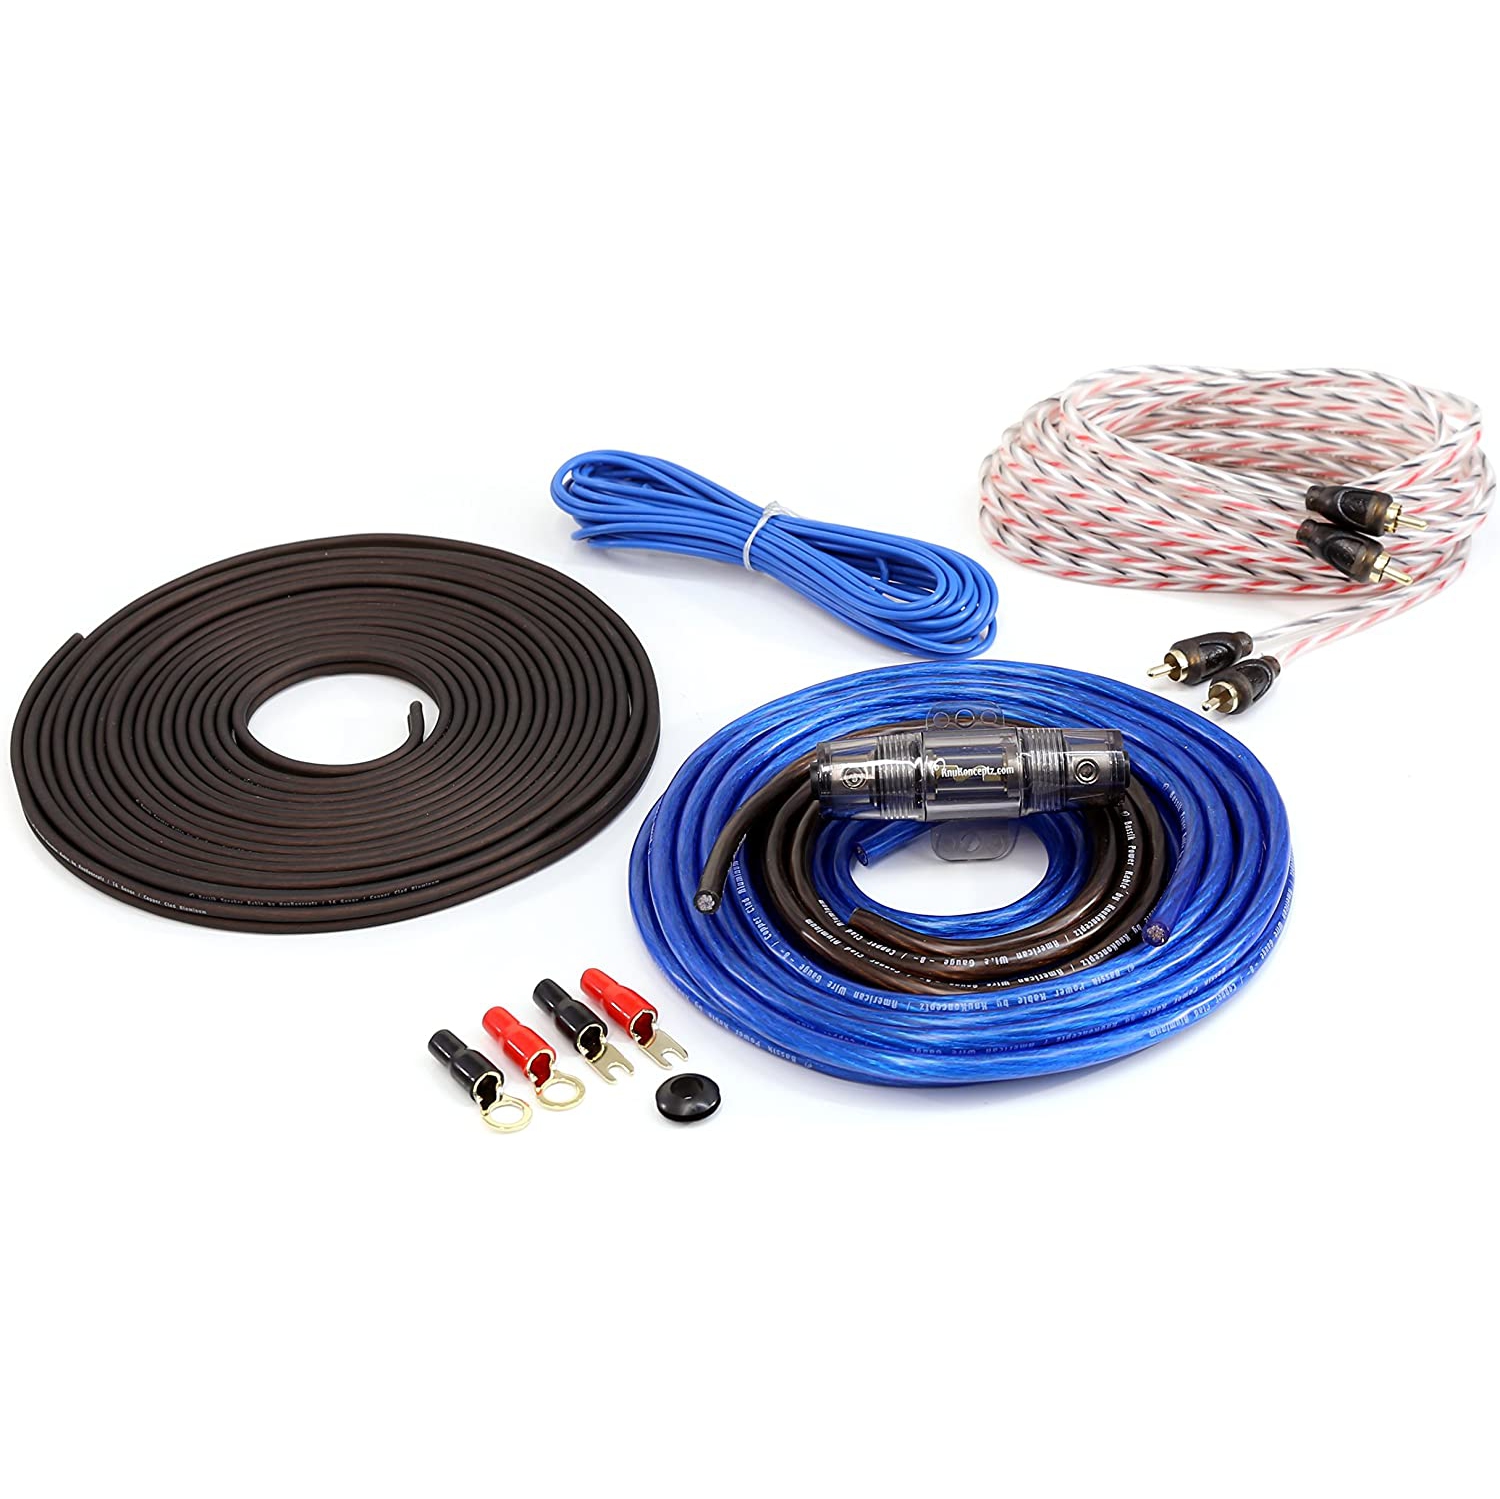 8 Gauge Complete Amplifier Installation Amp Wiring Kit with